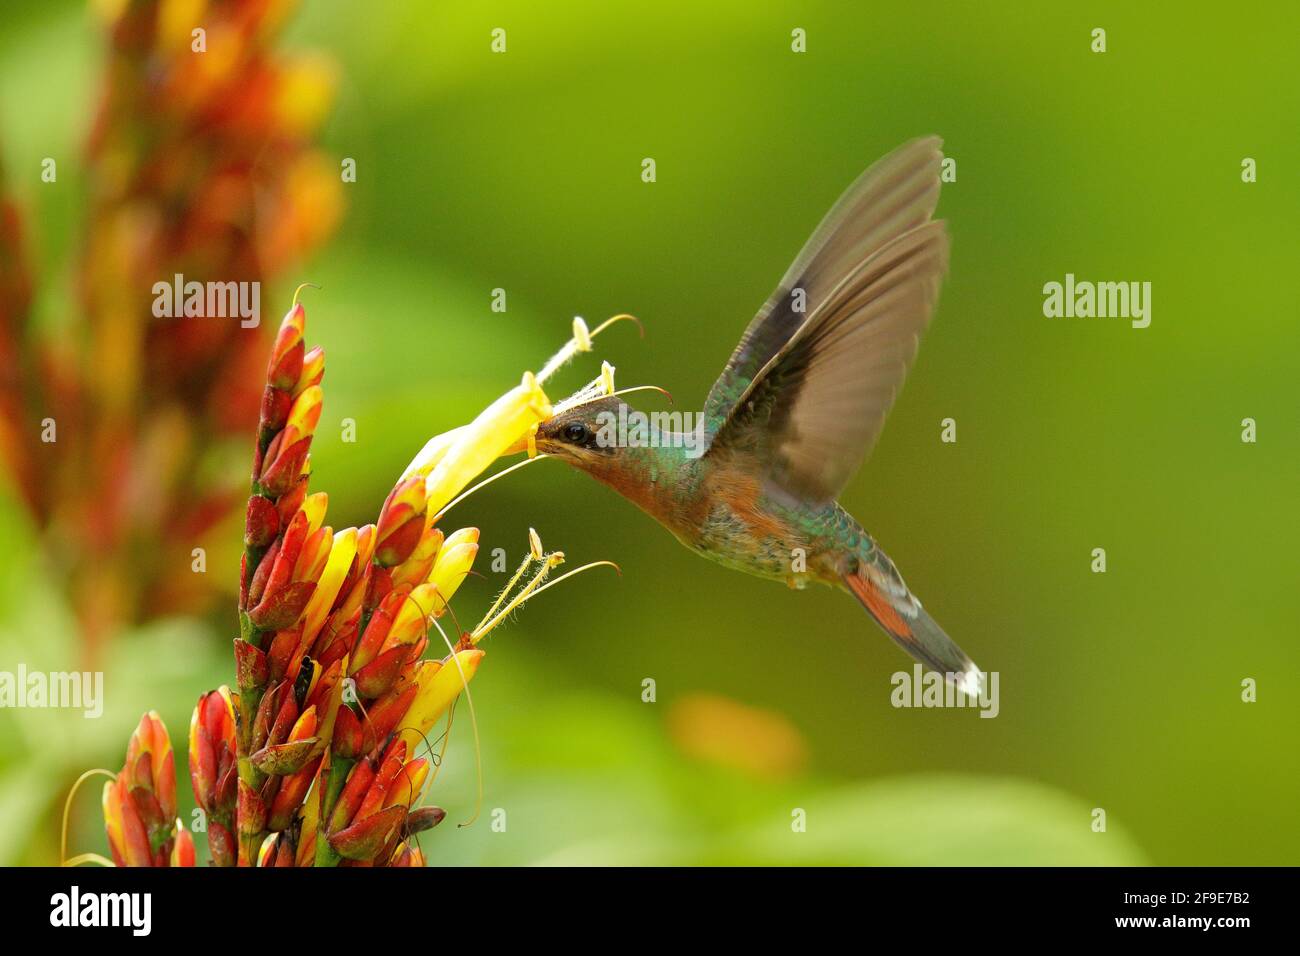 Green bird flying next to beautiful red flower in jungle. Action feeding scene in green tropical forest. Rufous-breasted hairy hermit, Glaucis hirsutu Stock Photo